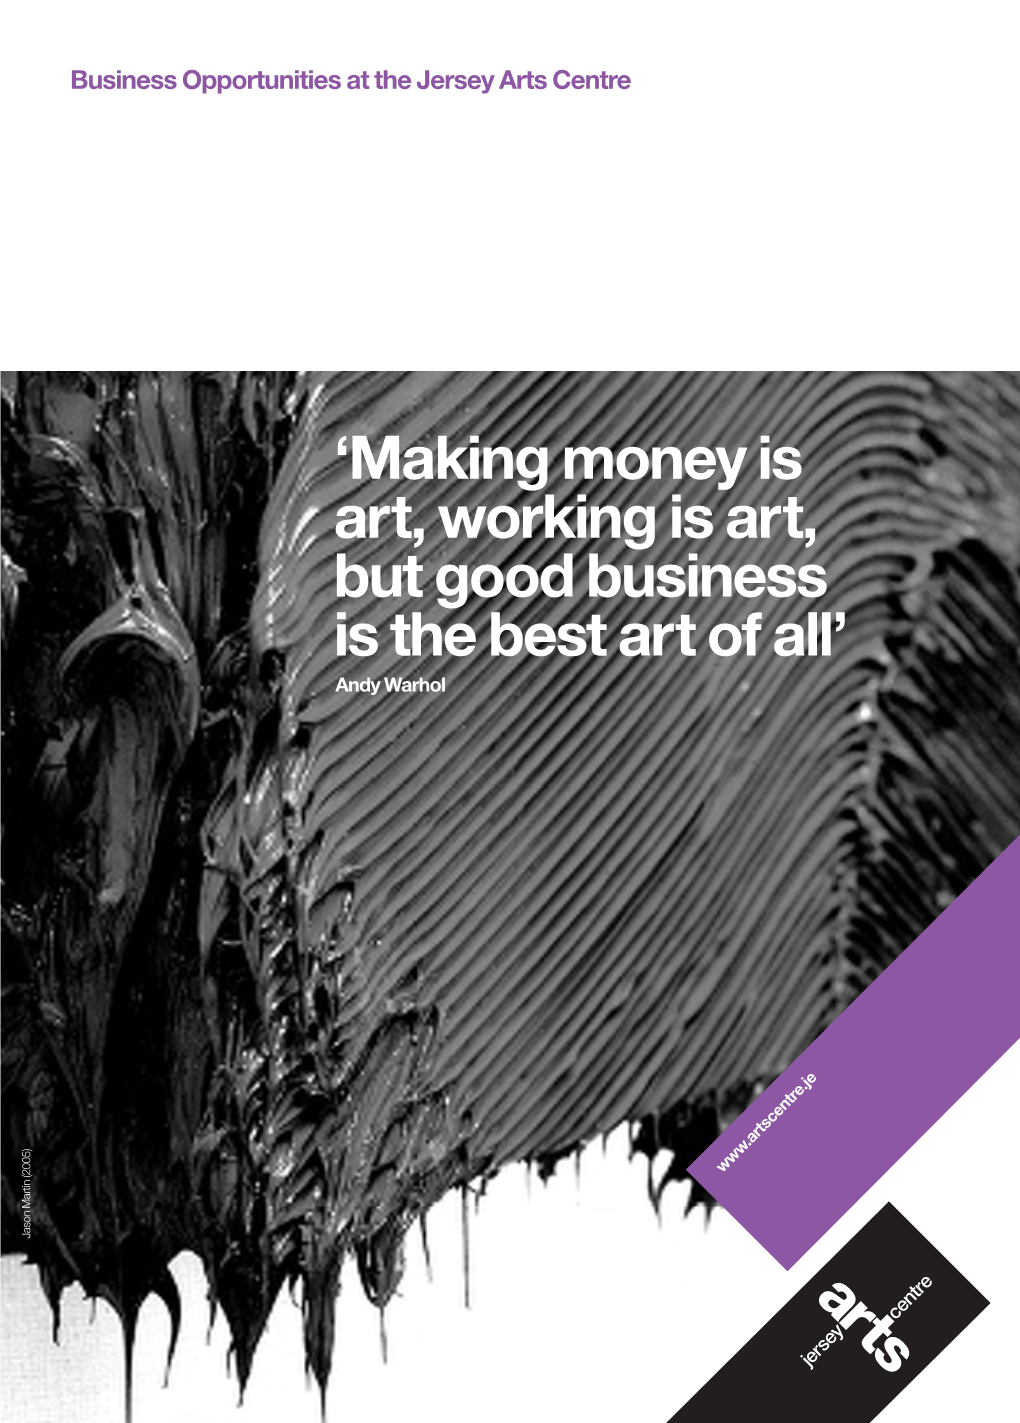 'Making Money Is Art, Working Is Art, but Good Business Is the Best Art of All'